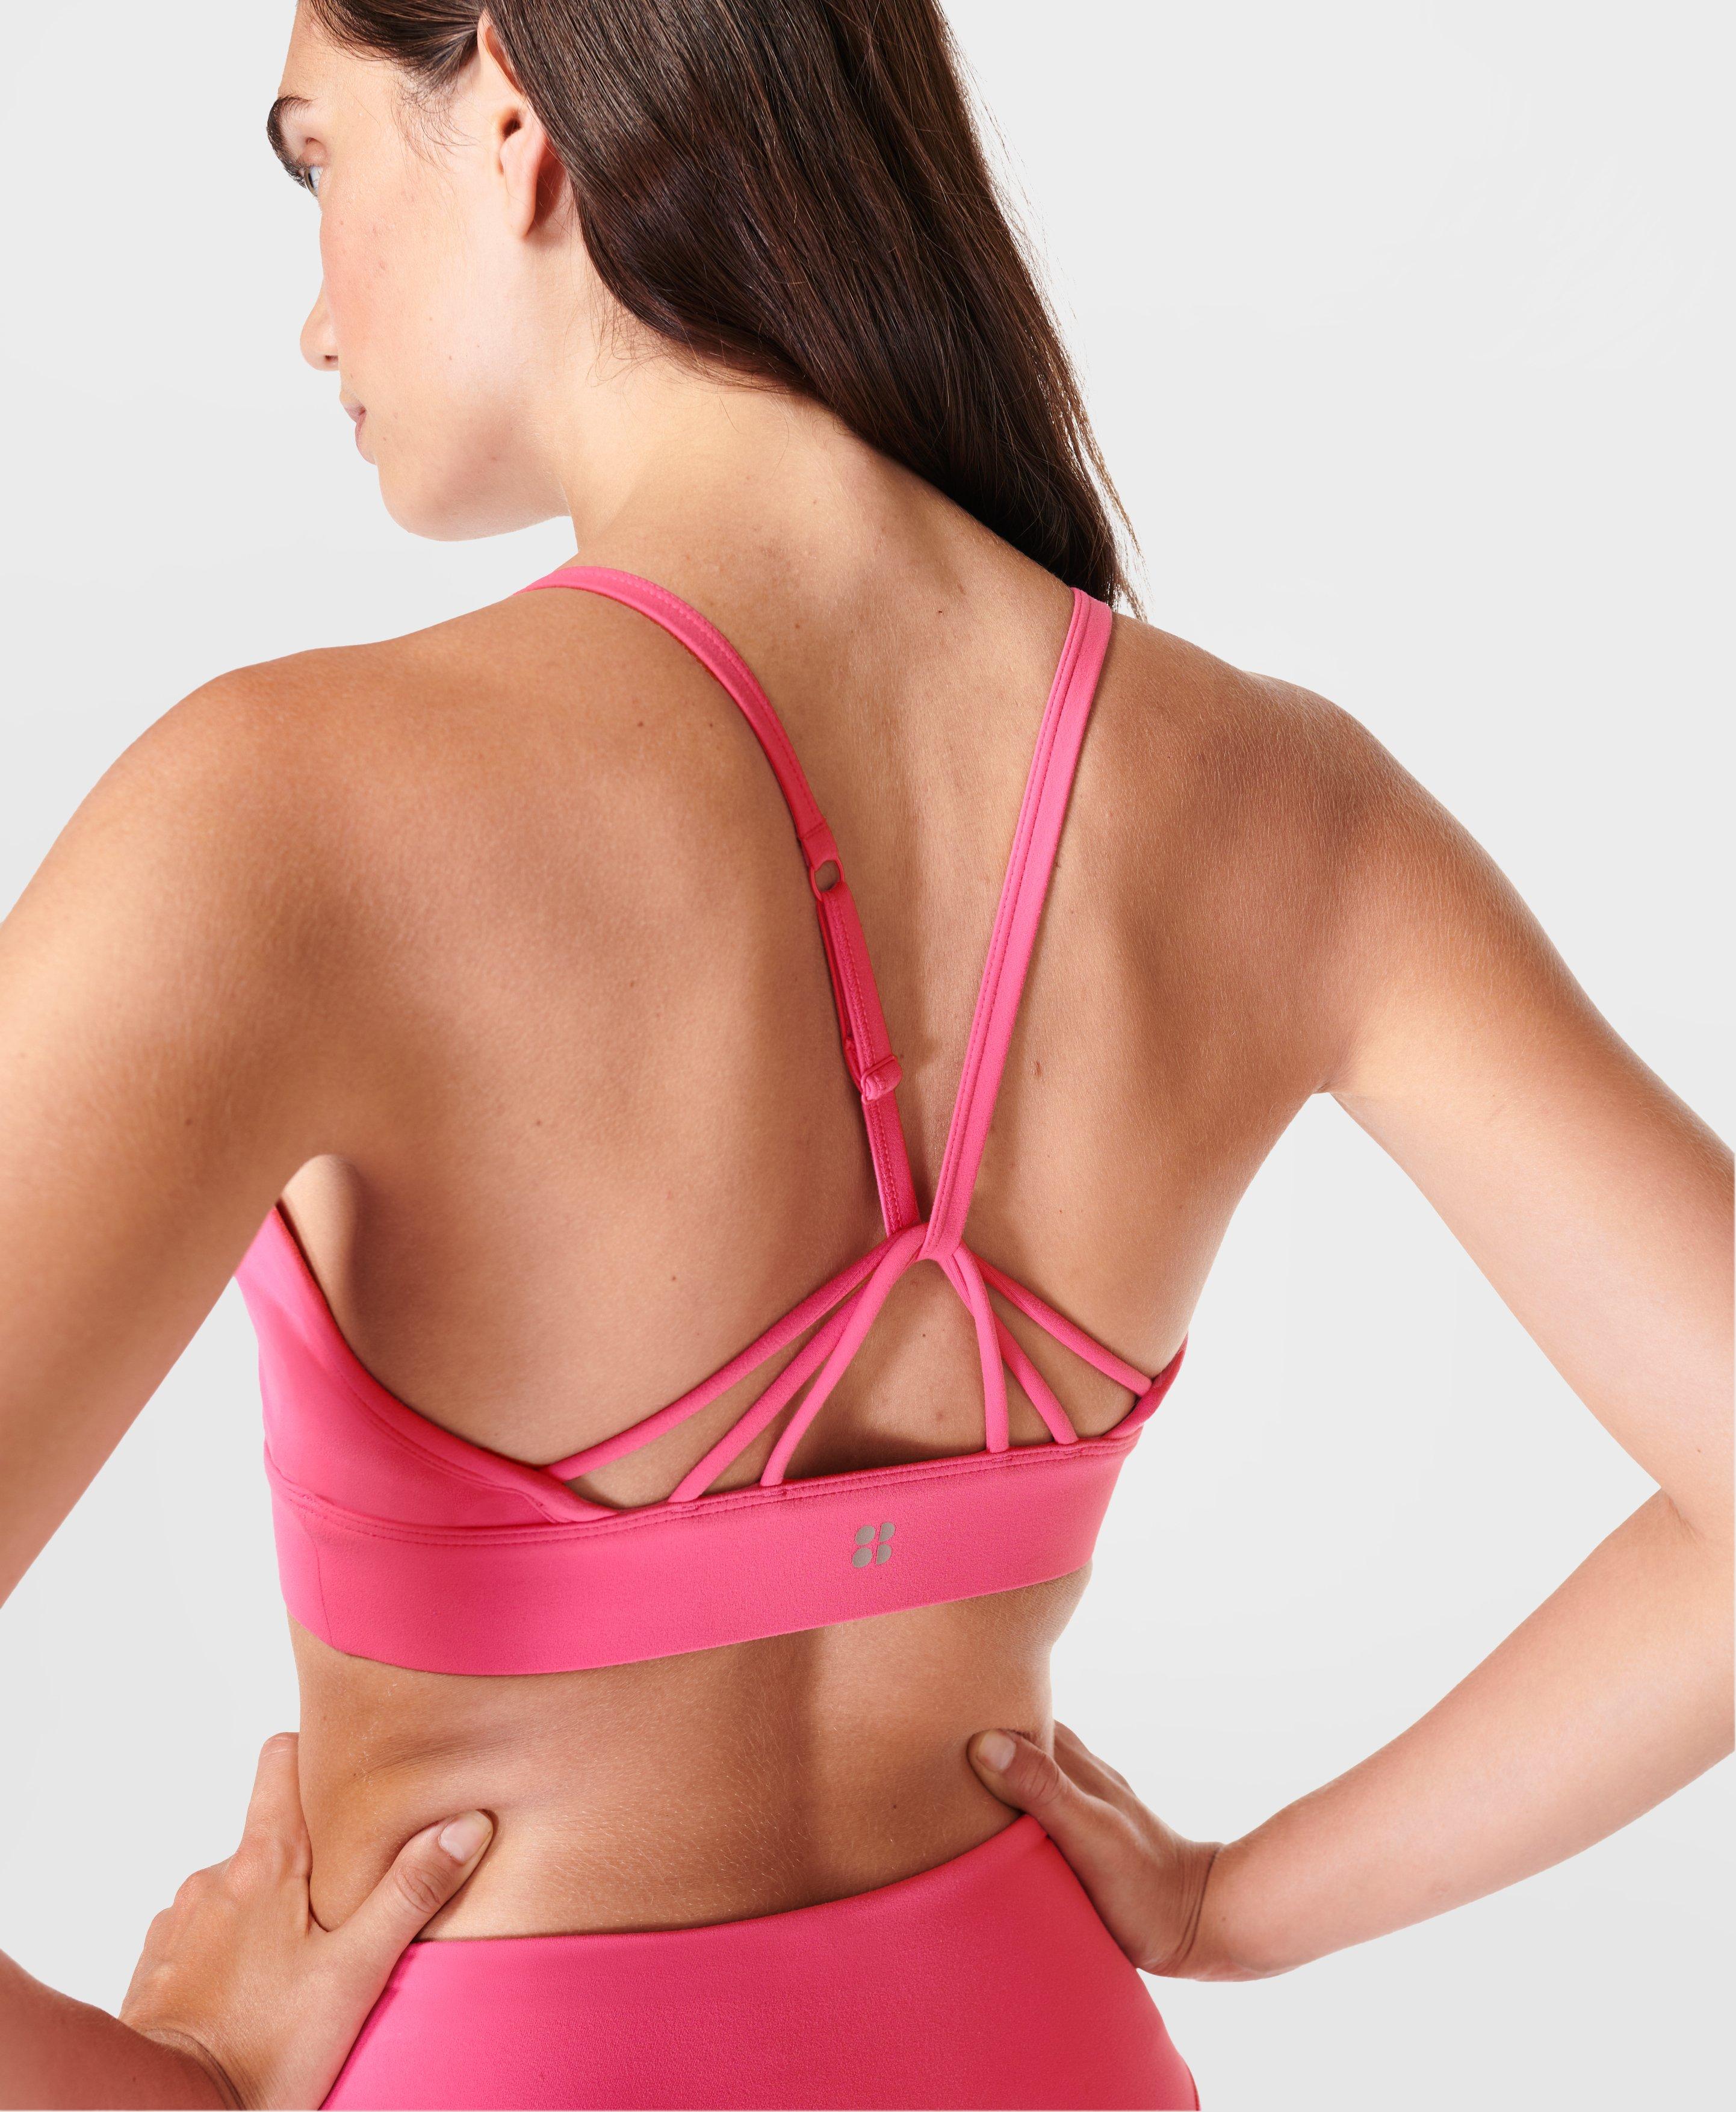 Victoria's Secret PINK - Super strappy styles in new colors